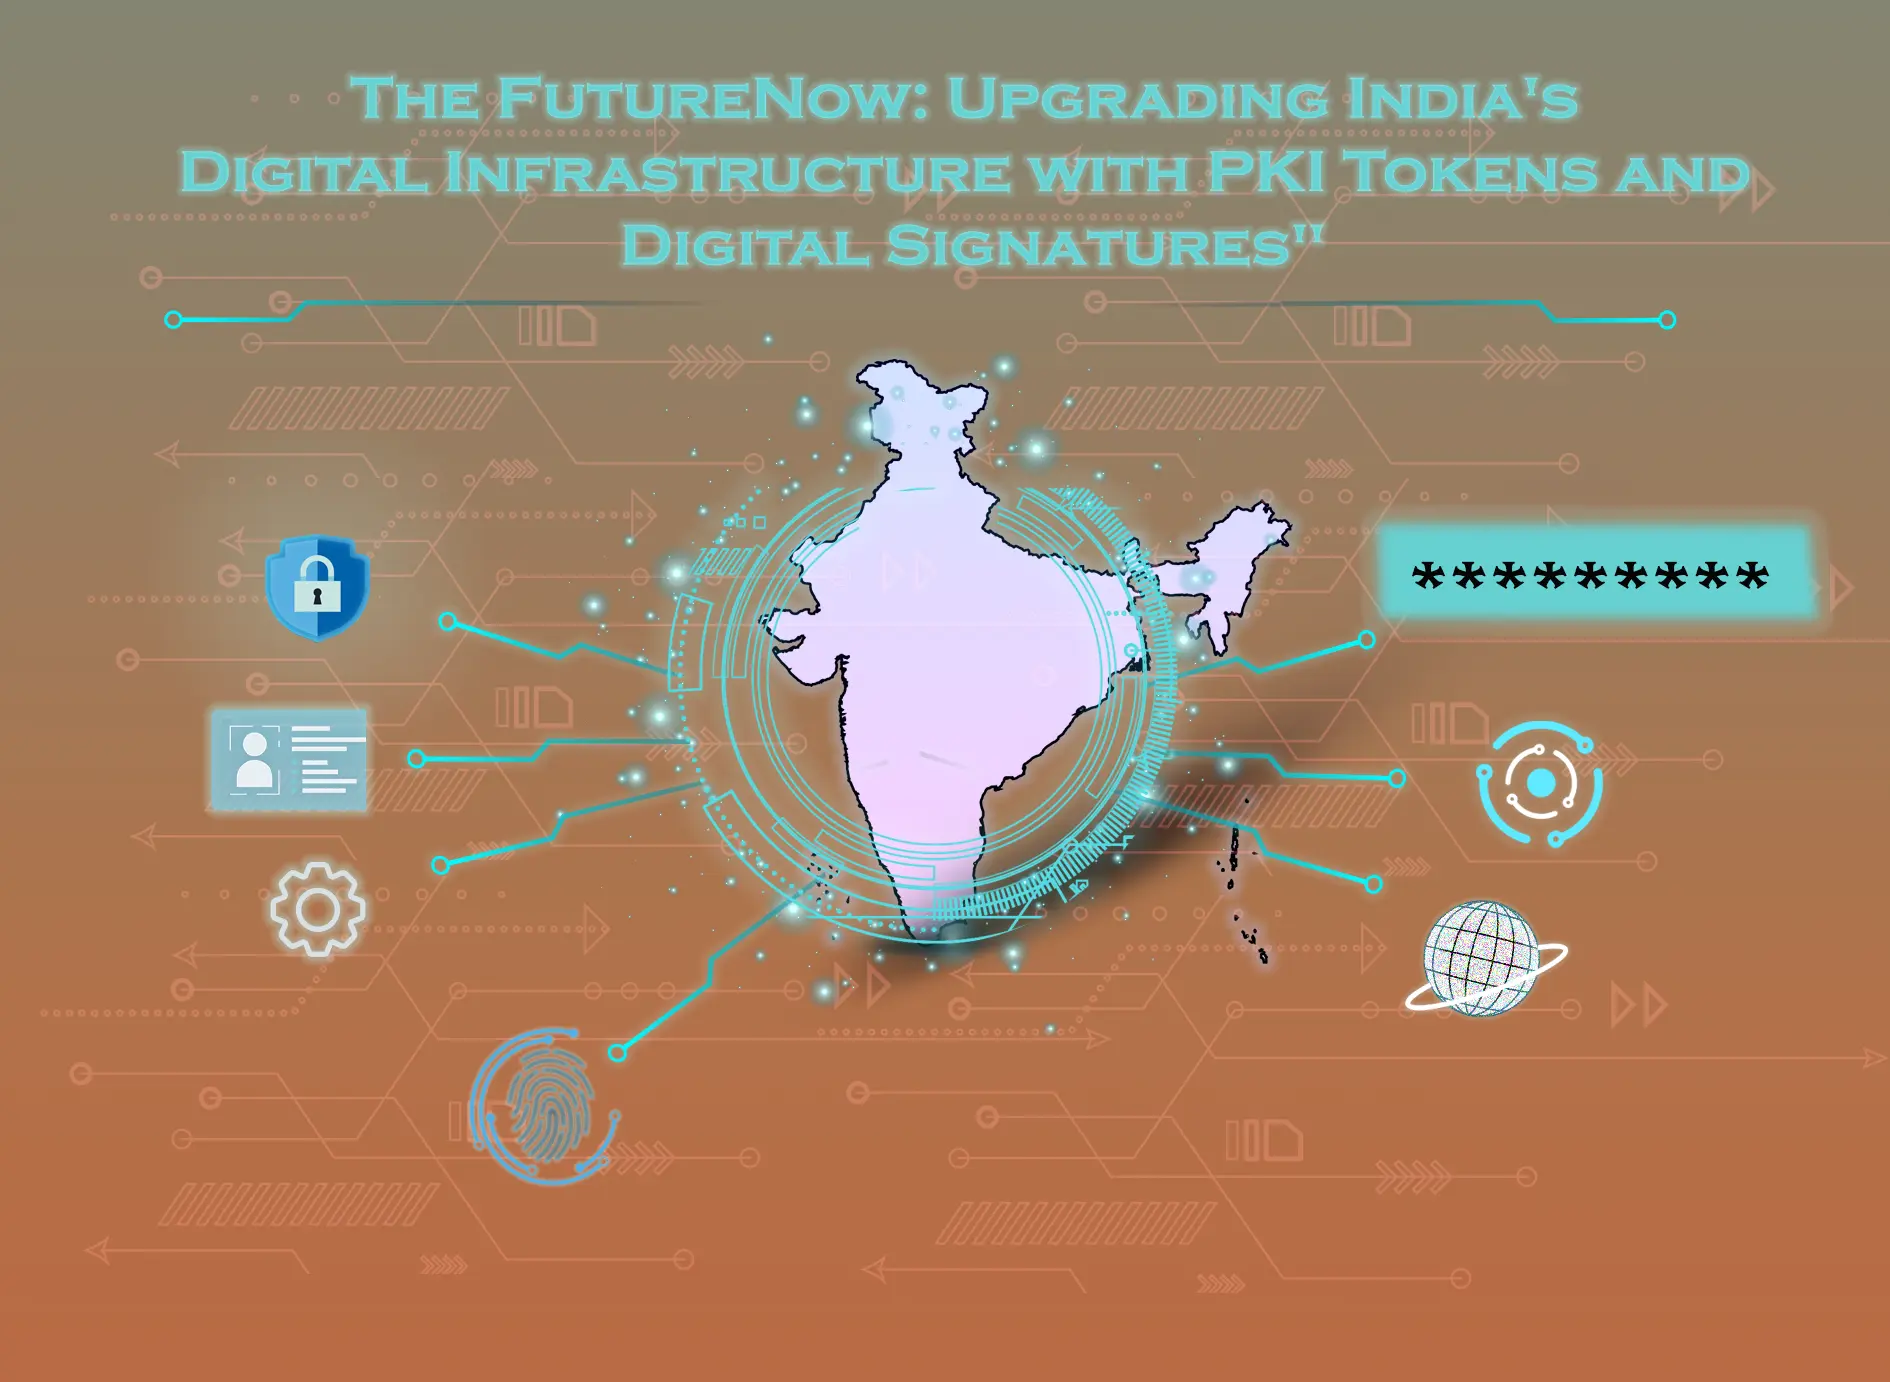 The Future is Now: Upgrading India's Digital Infrastructure with PKI/EpassTokens and Digital Signatures